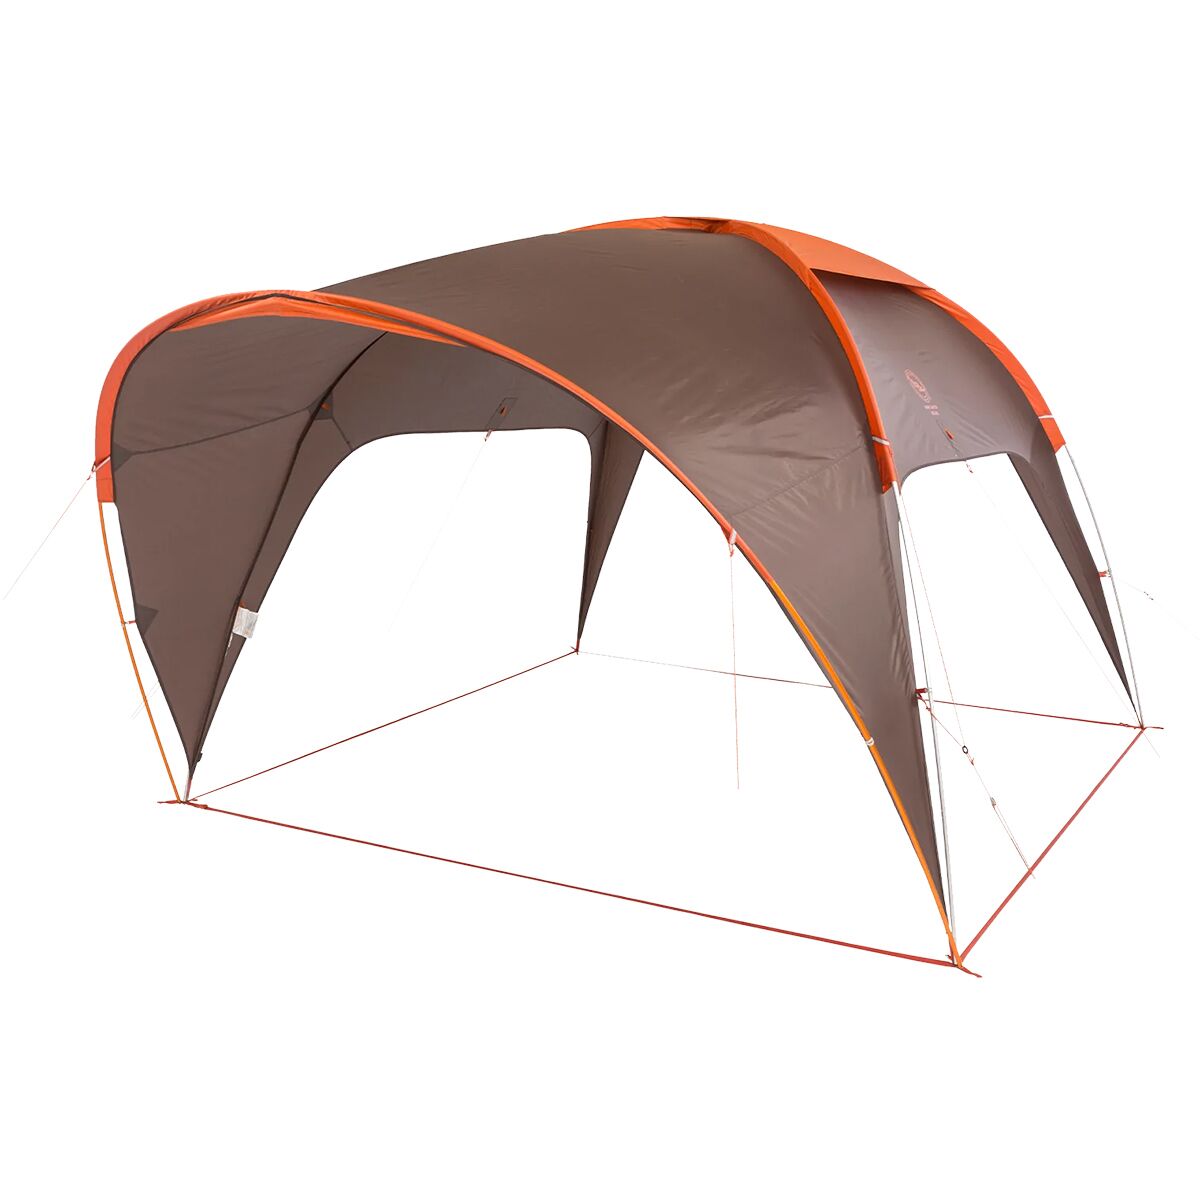 Photos - Other goods for tourism Big Agnes Sage Canyon Shelter Deluxe 